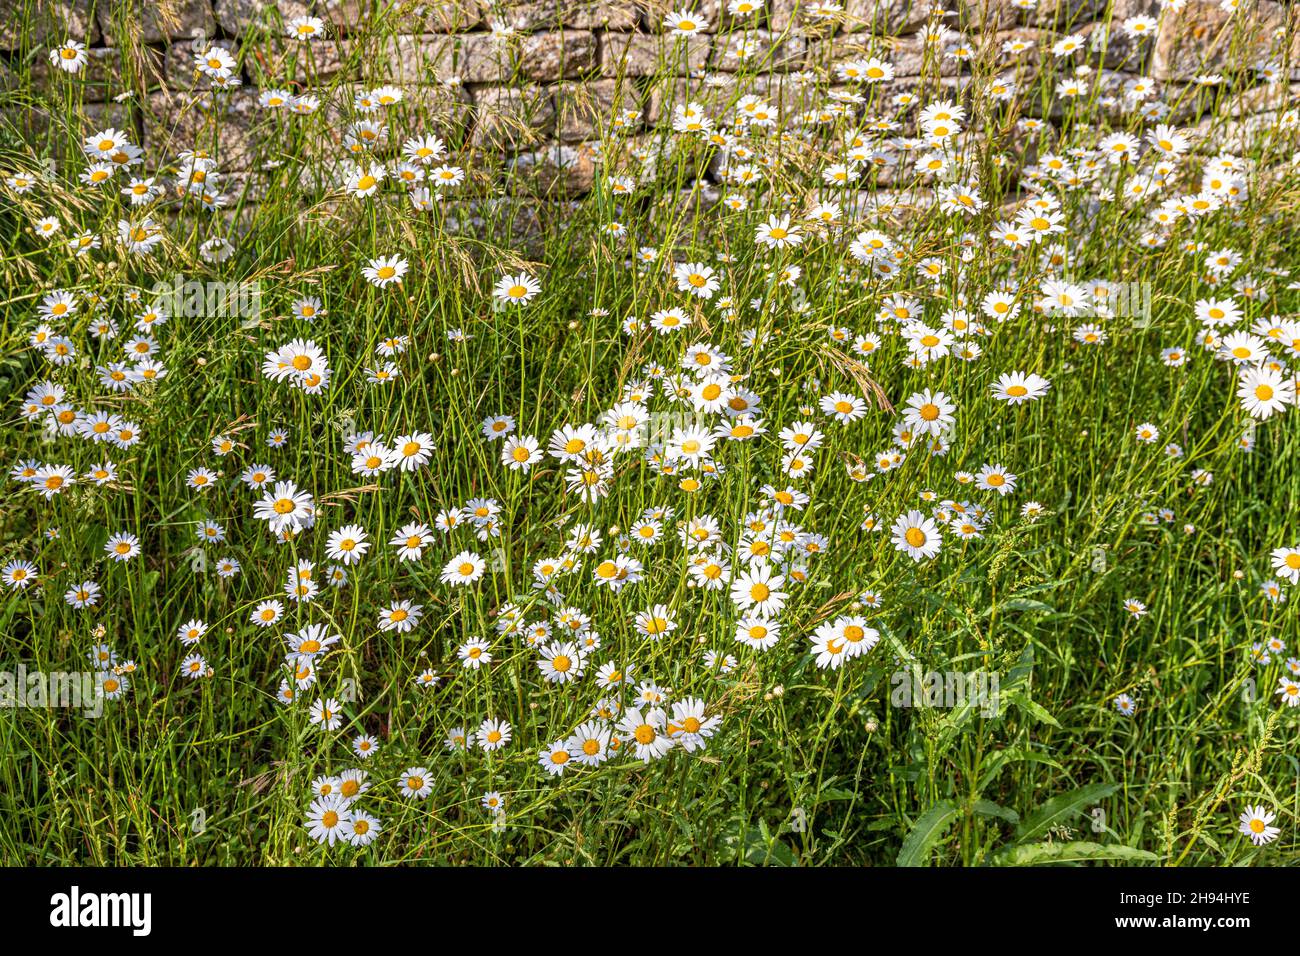 Oxeye daisies flowering in June beside a dry stone wall in the Cotswold village of Winson, Gloucestershire UK Stock Photo